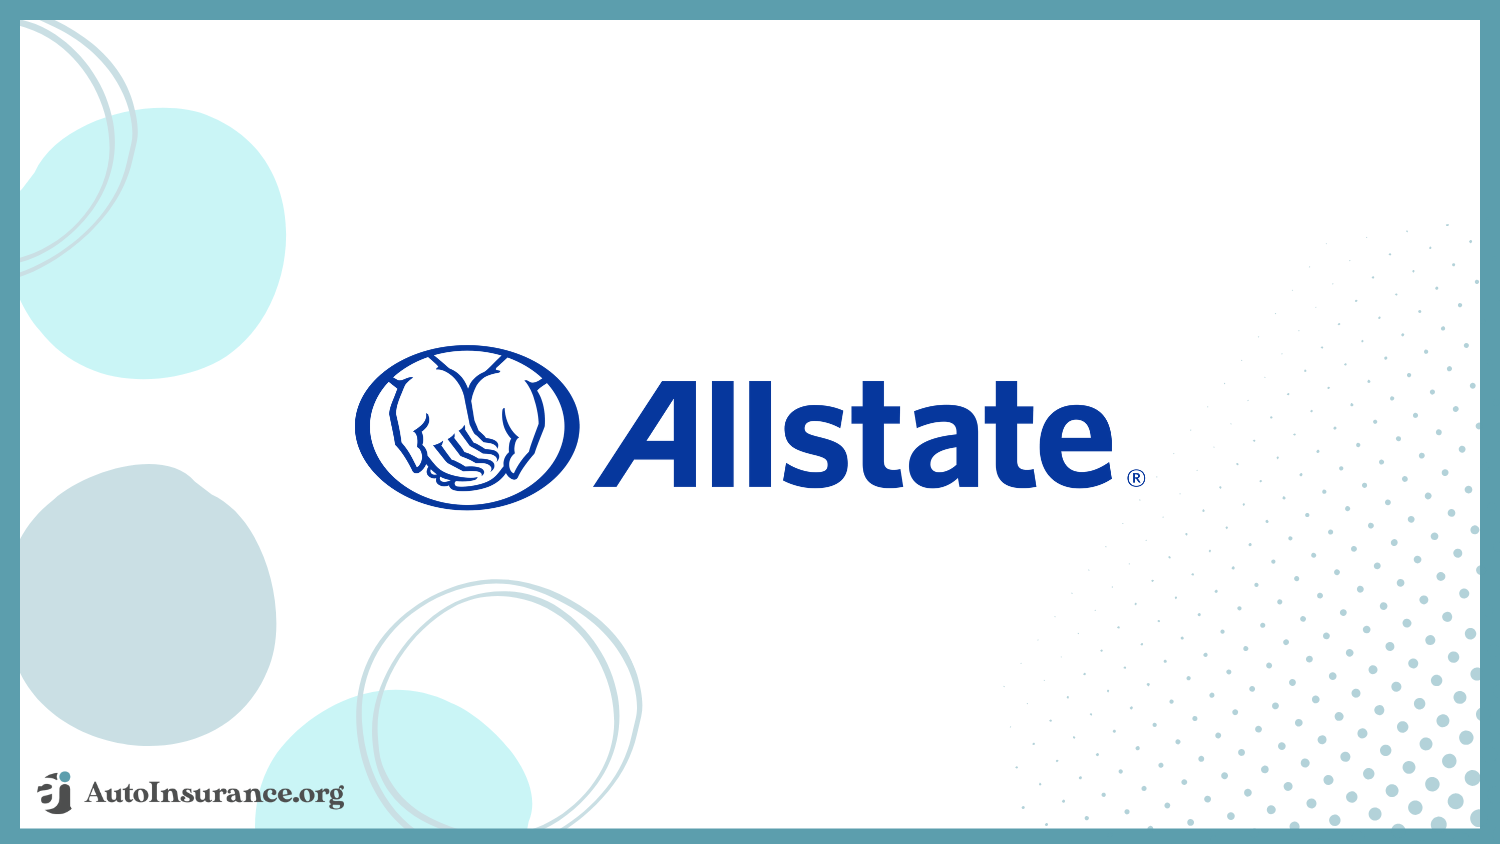 Allstate: Best Auto Insurance for Drivers with Dementia